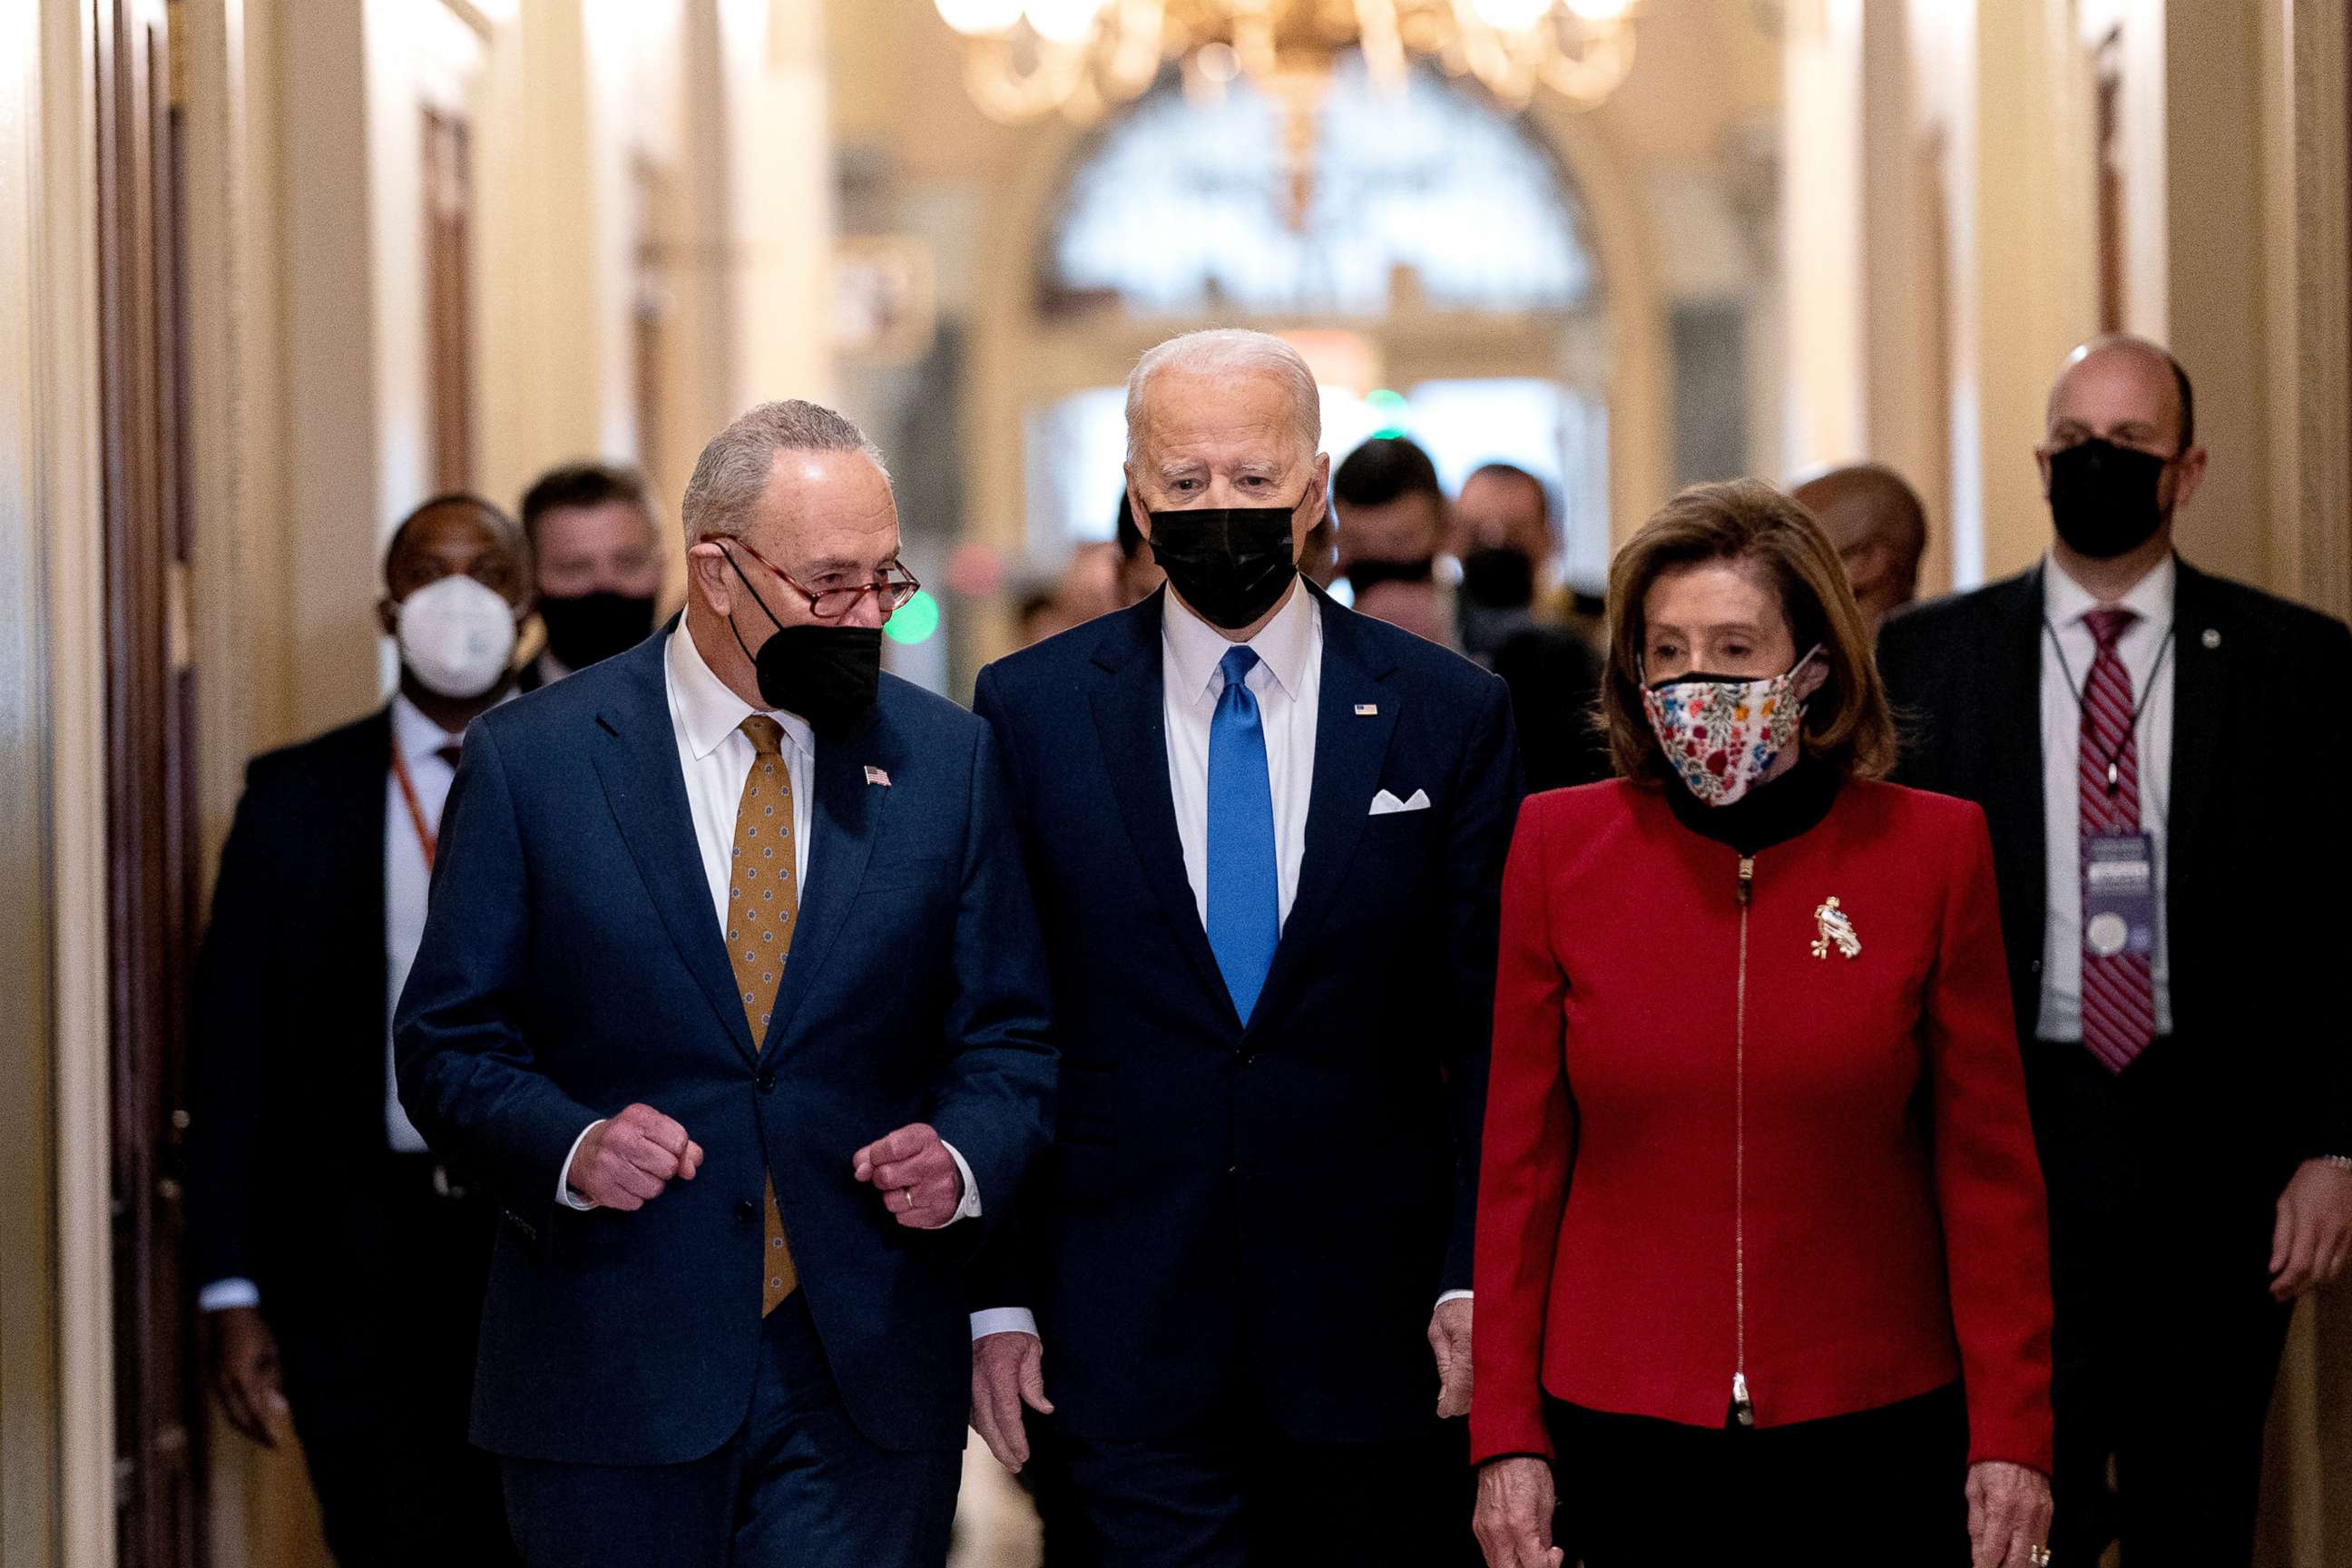 PHOTO: In this Jan. 6, 2022 file photo Senate Majority Leader Chuck Schumer, President Joe Biden with Speaker of the House Nancy Pelosi arrives at the Capitol onto mark the anniversary of the attack on the Capitol in Washington, D.C.